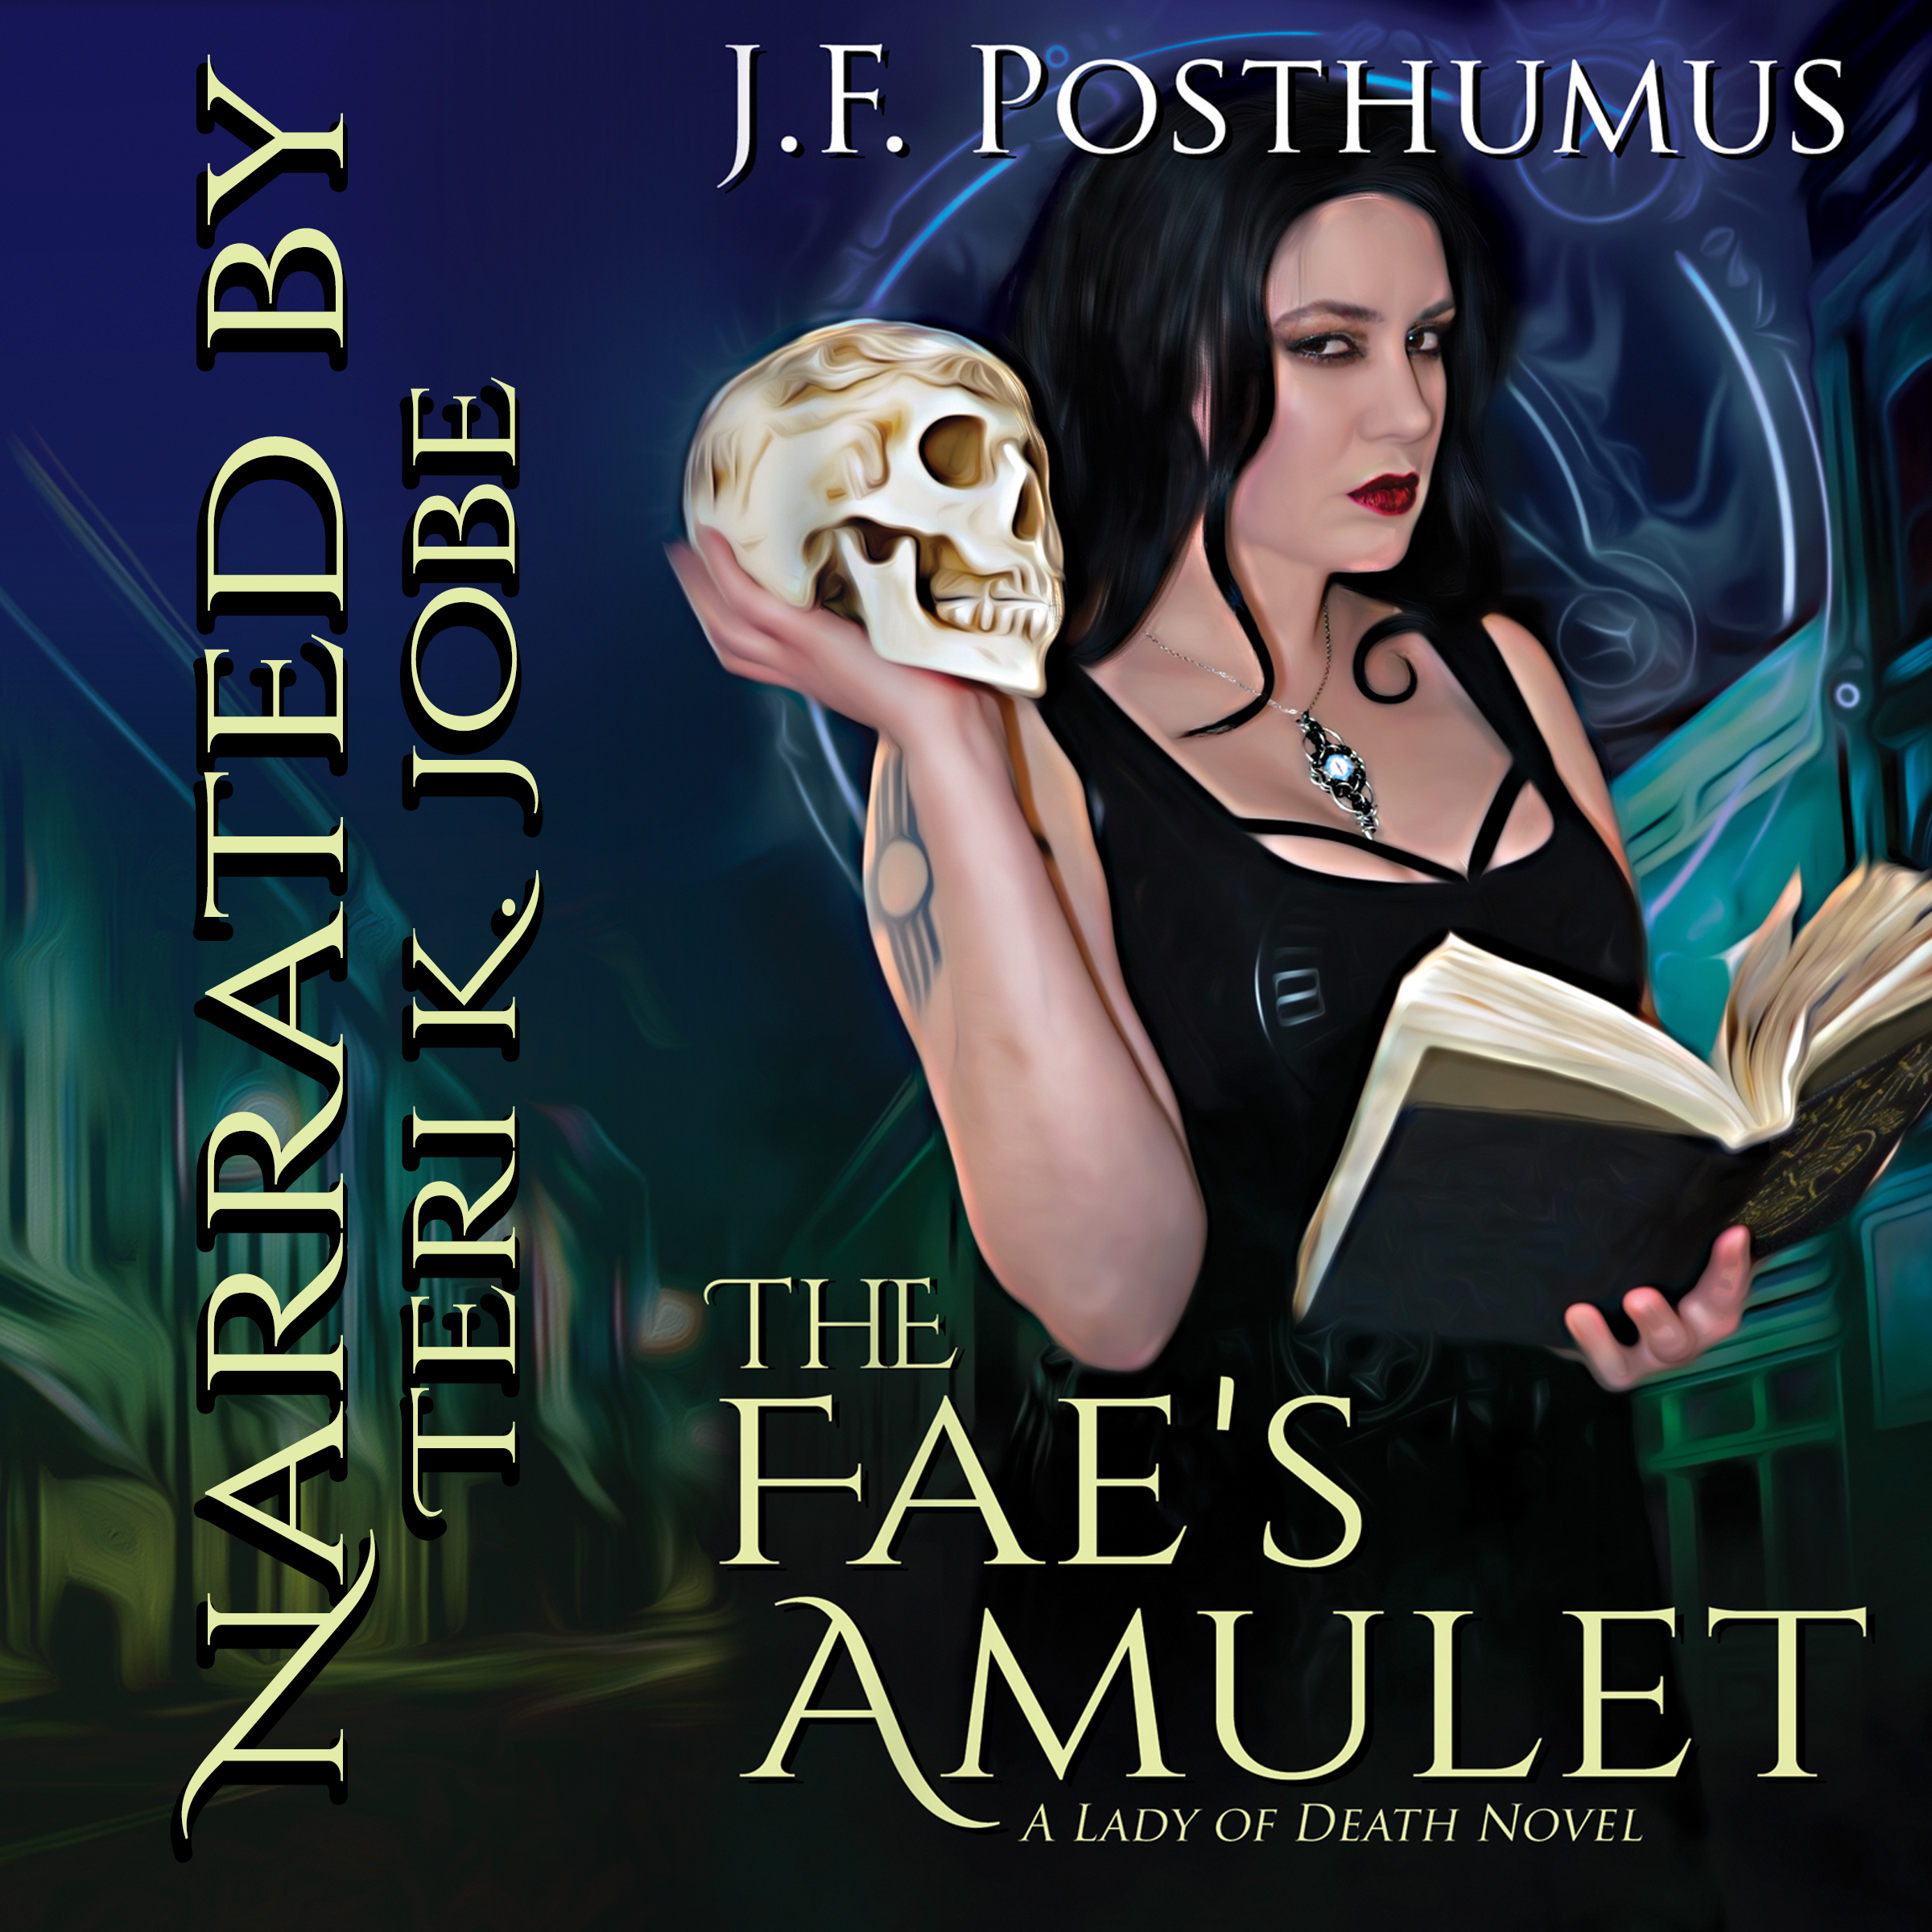 Fae’s Amulet by J.F. Posthumus is now available on Audible!